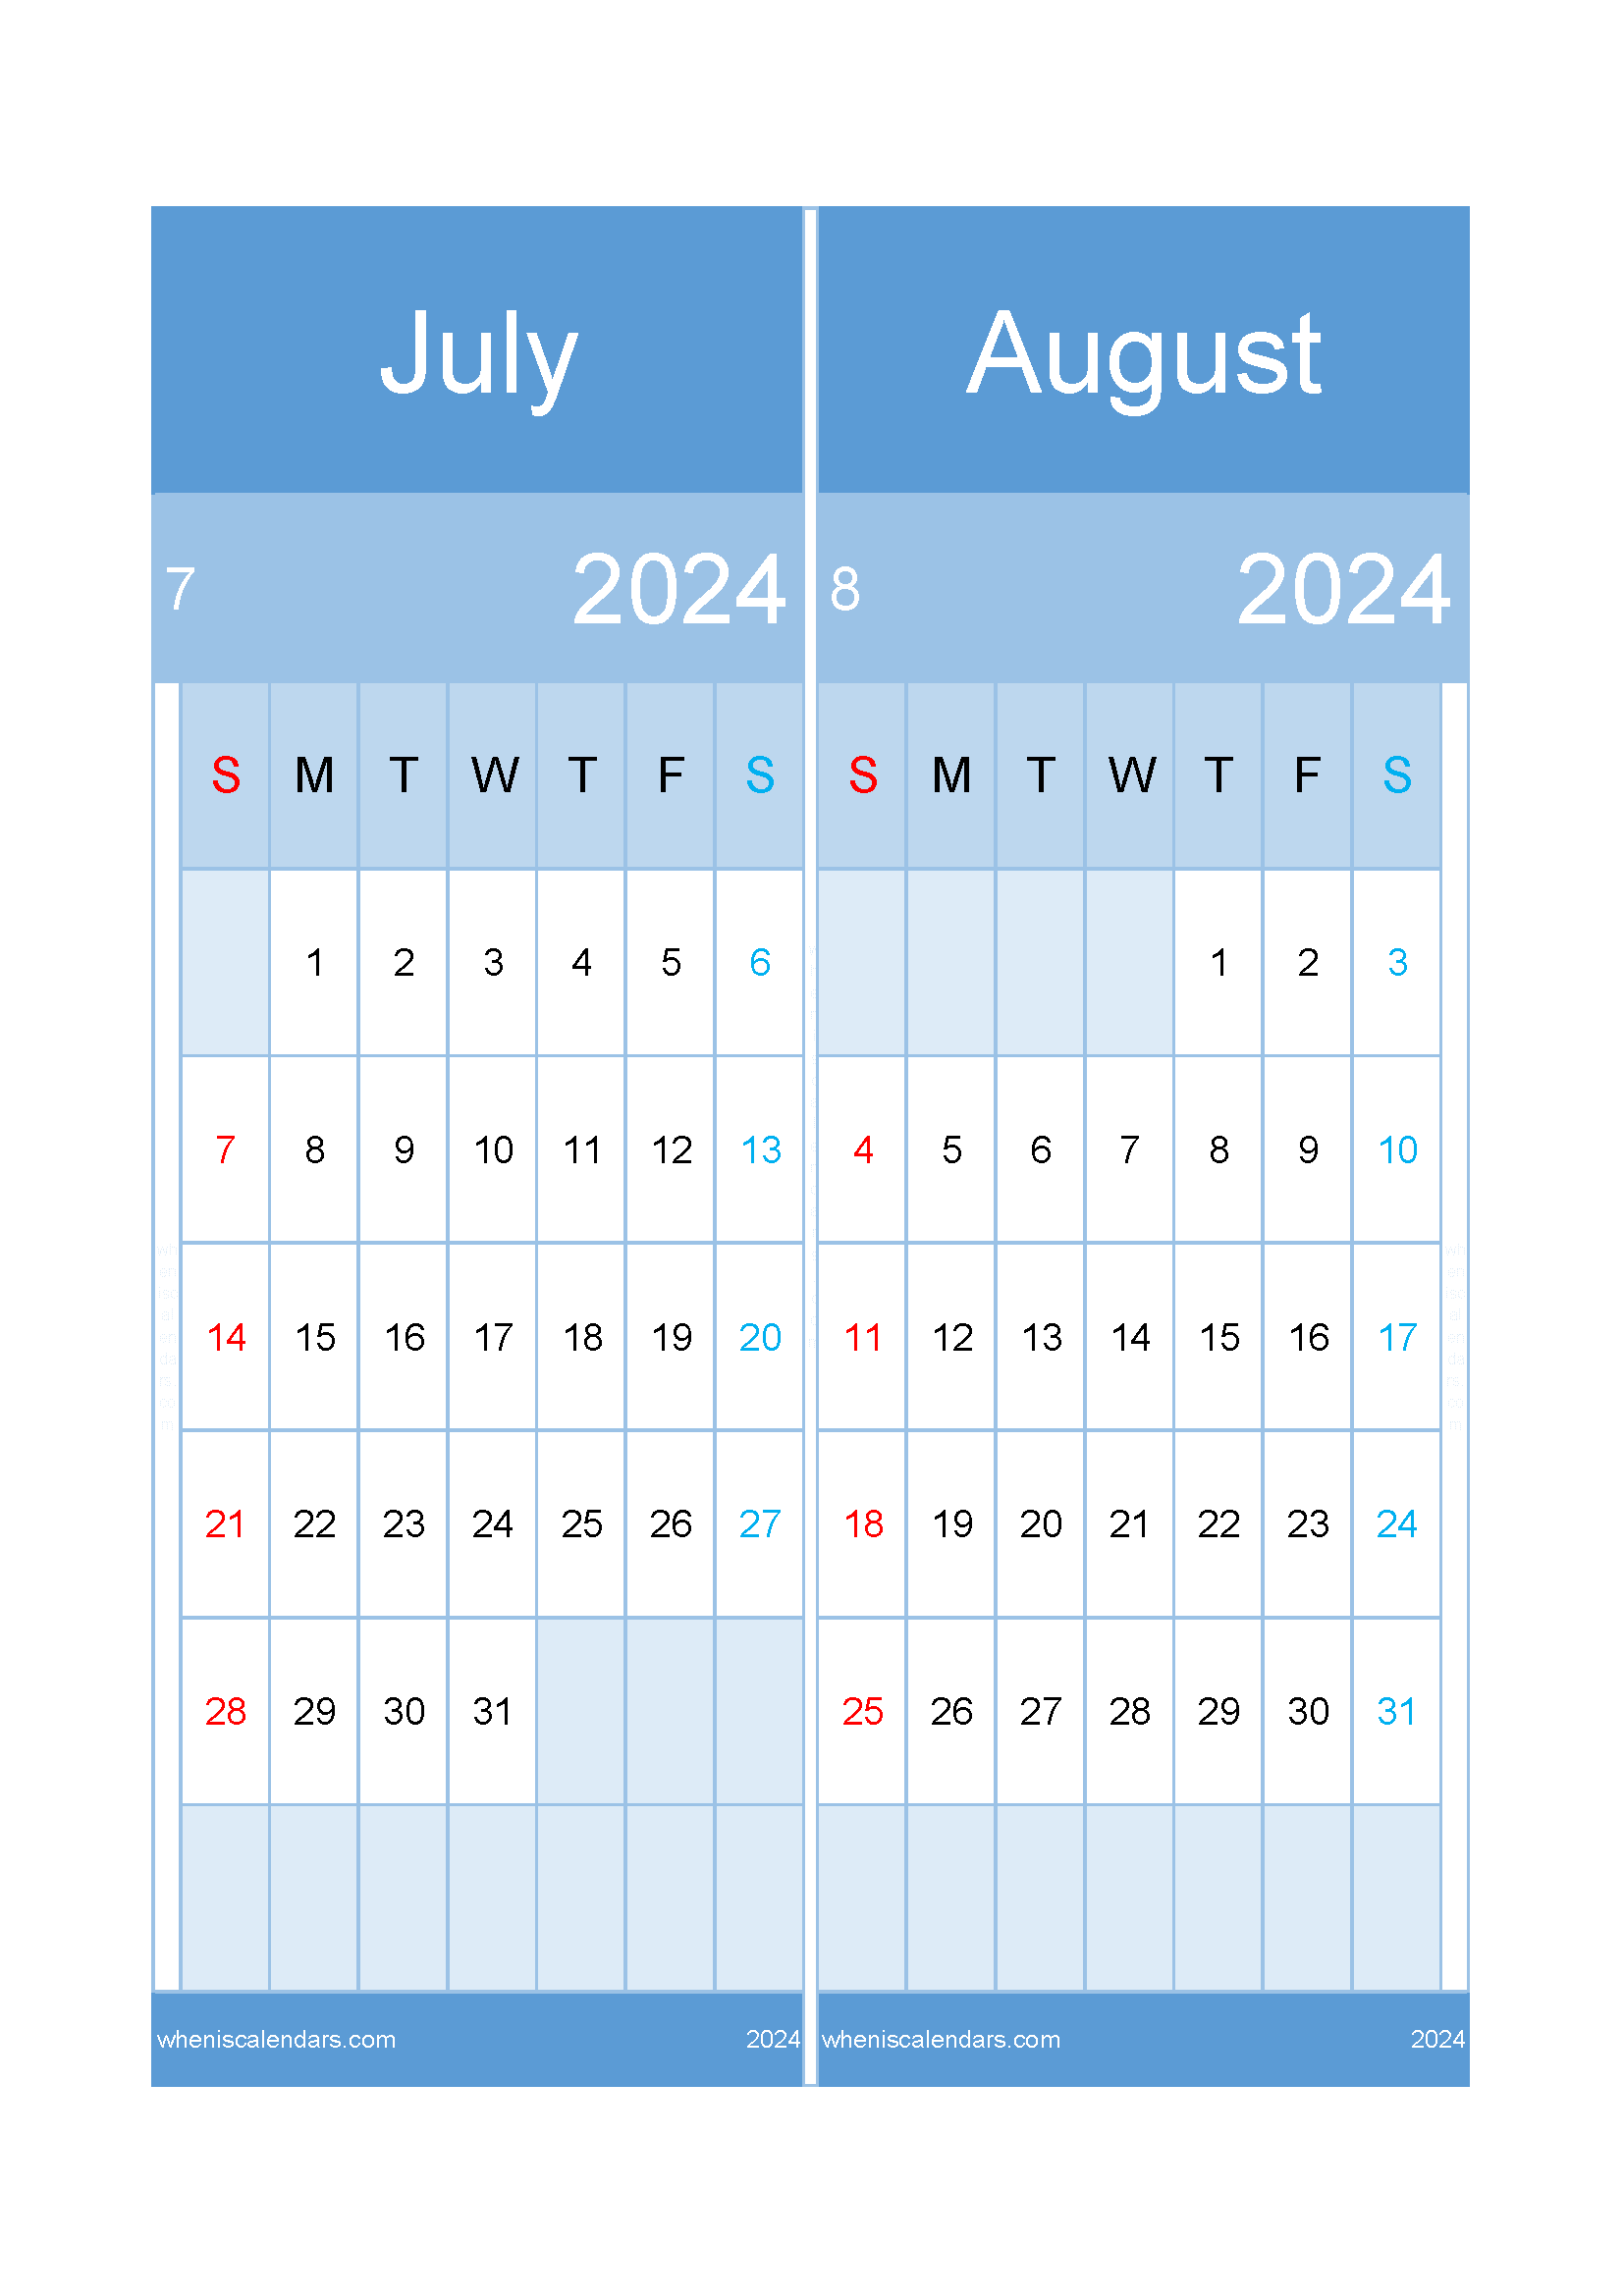 Download July to August 2024 calendar A4 JA24024